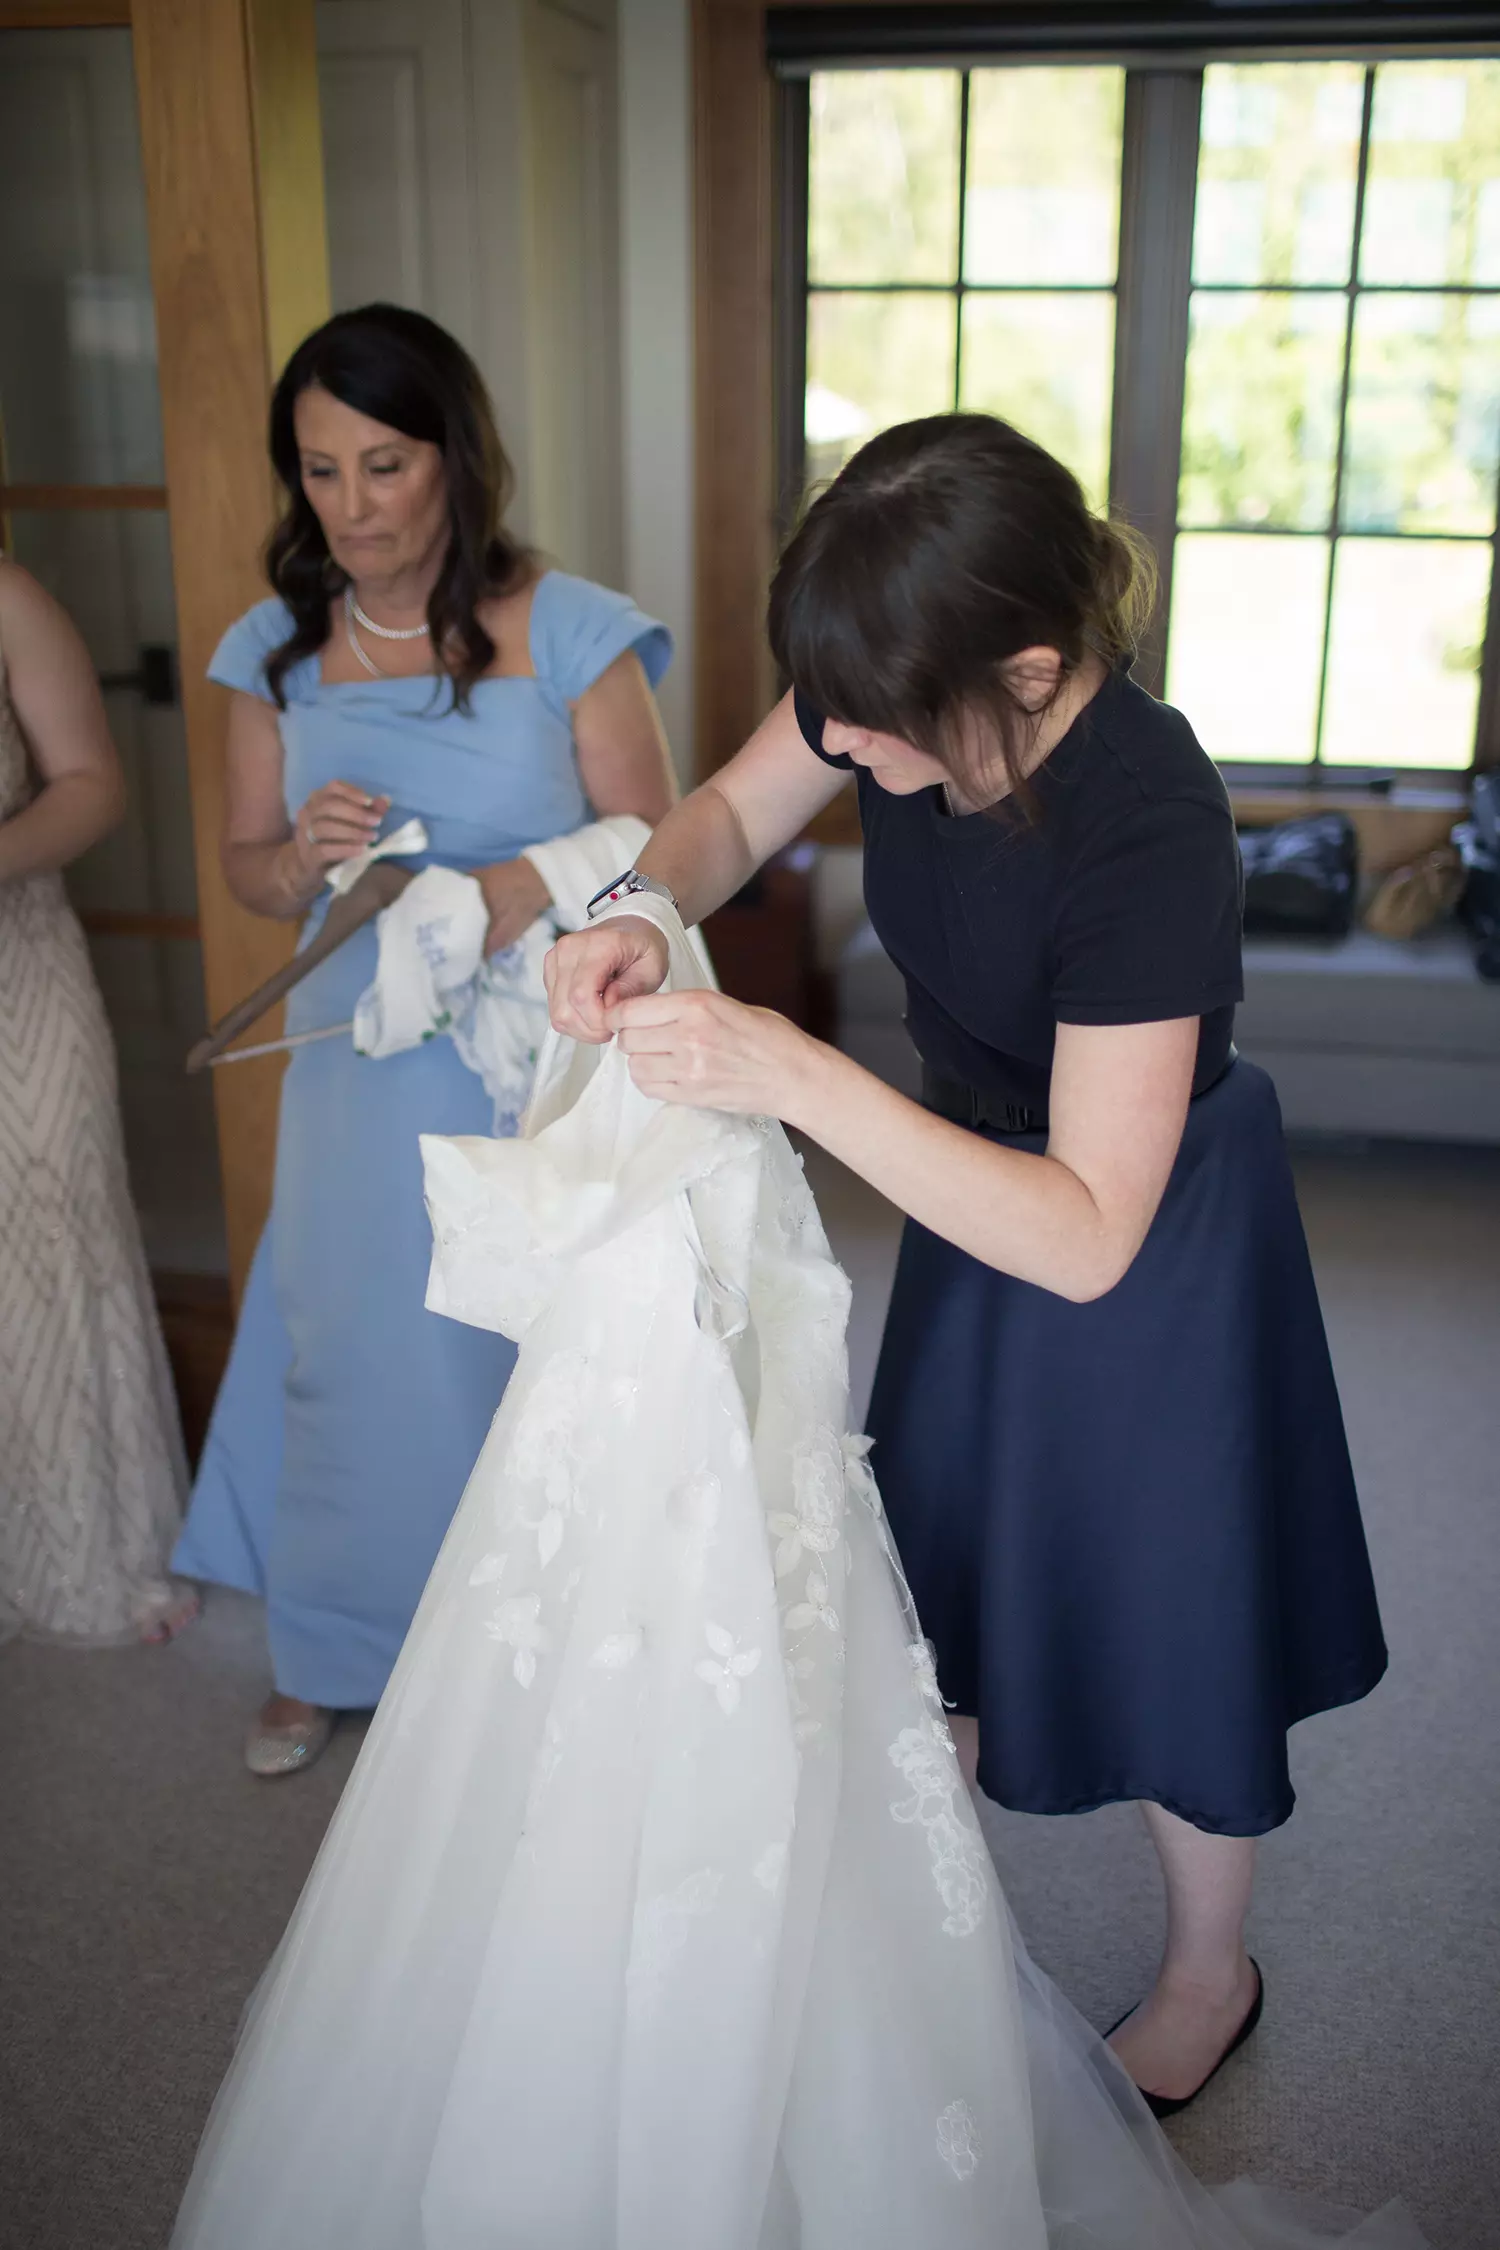 The Stylish Bride. Wedding Day services. Your “Ladies-in-Waiting” take care of everything you need on your wedding day — from steaming the wedding dress to repairing broken zippers. Wedding day dressers and stylists.